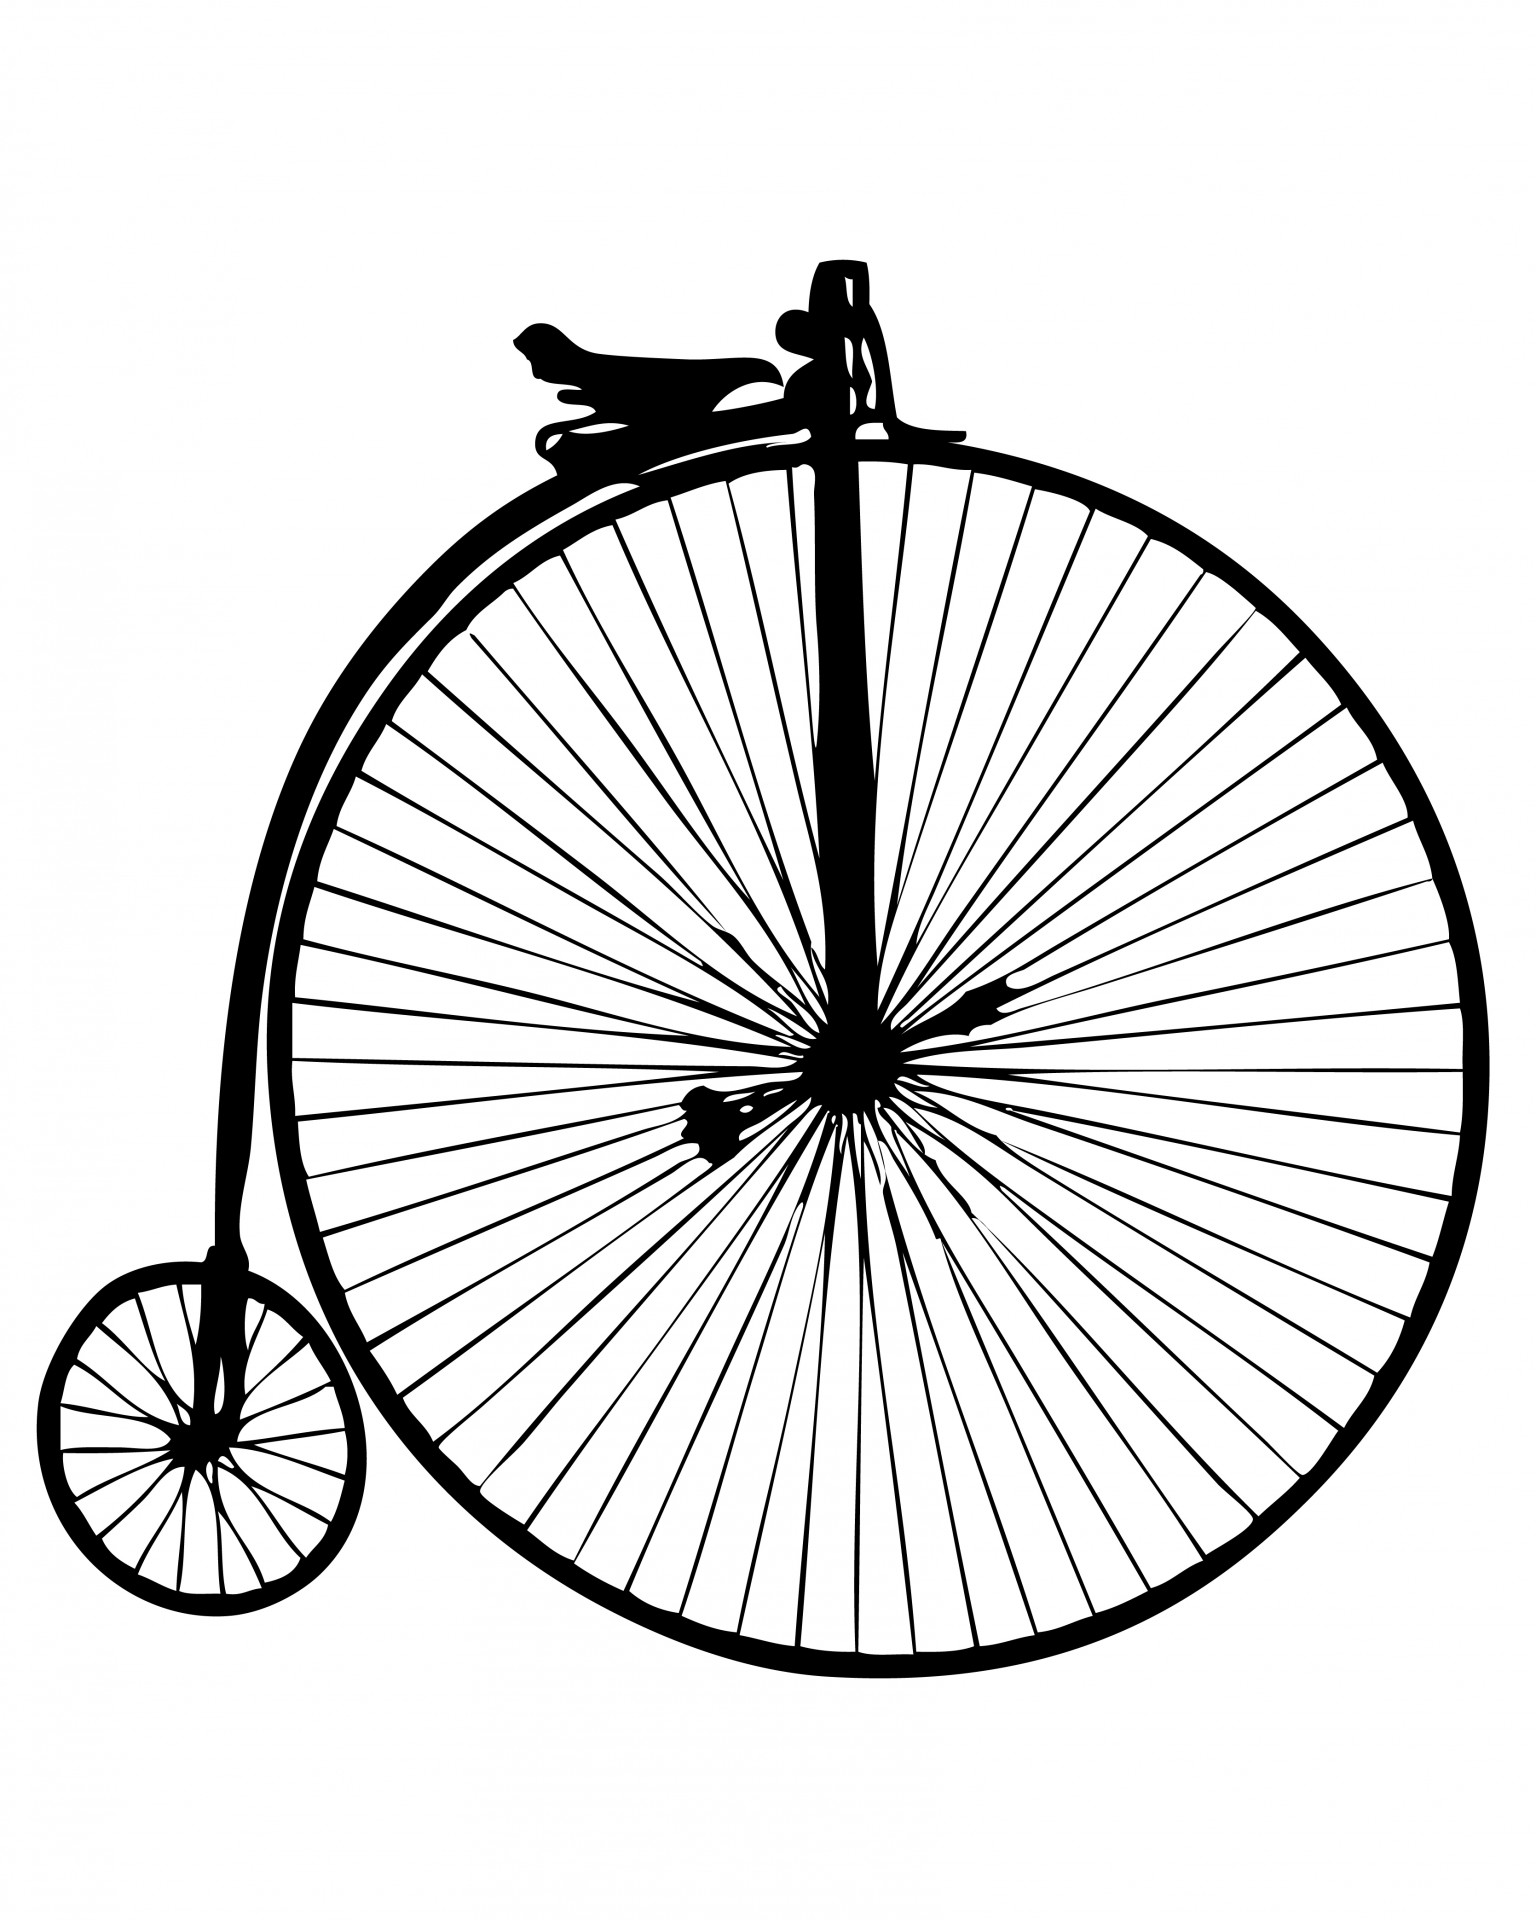 penny farthing vintage bicycle free photo